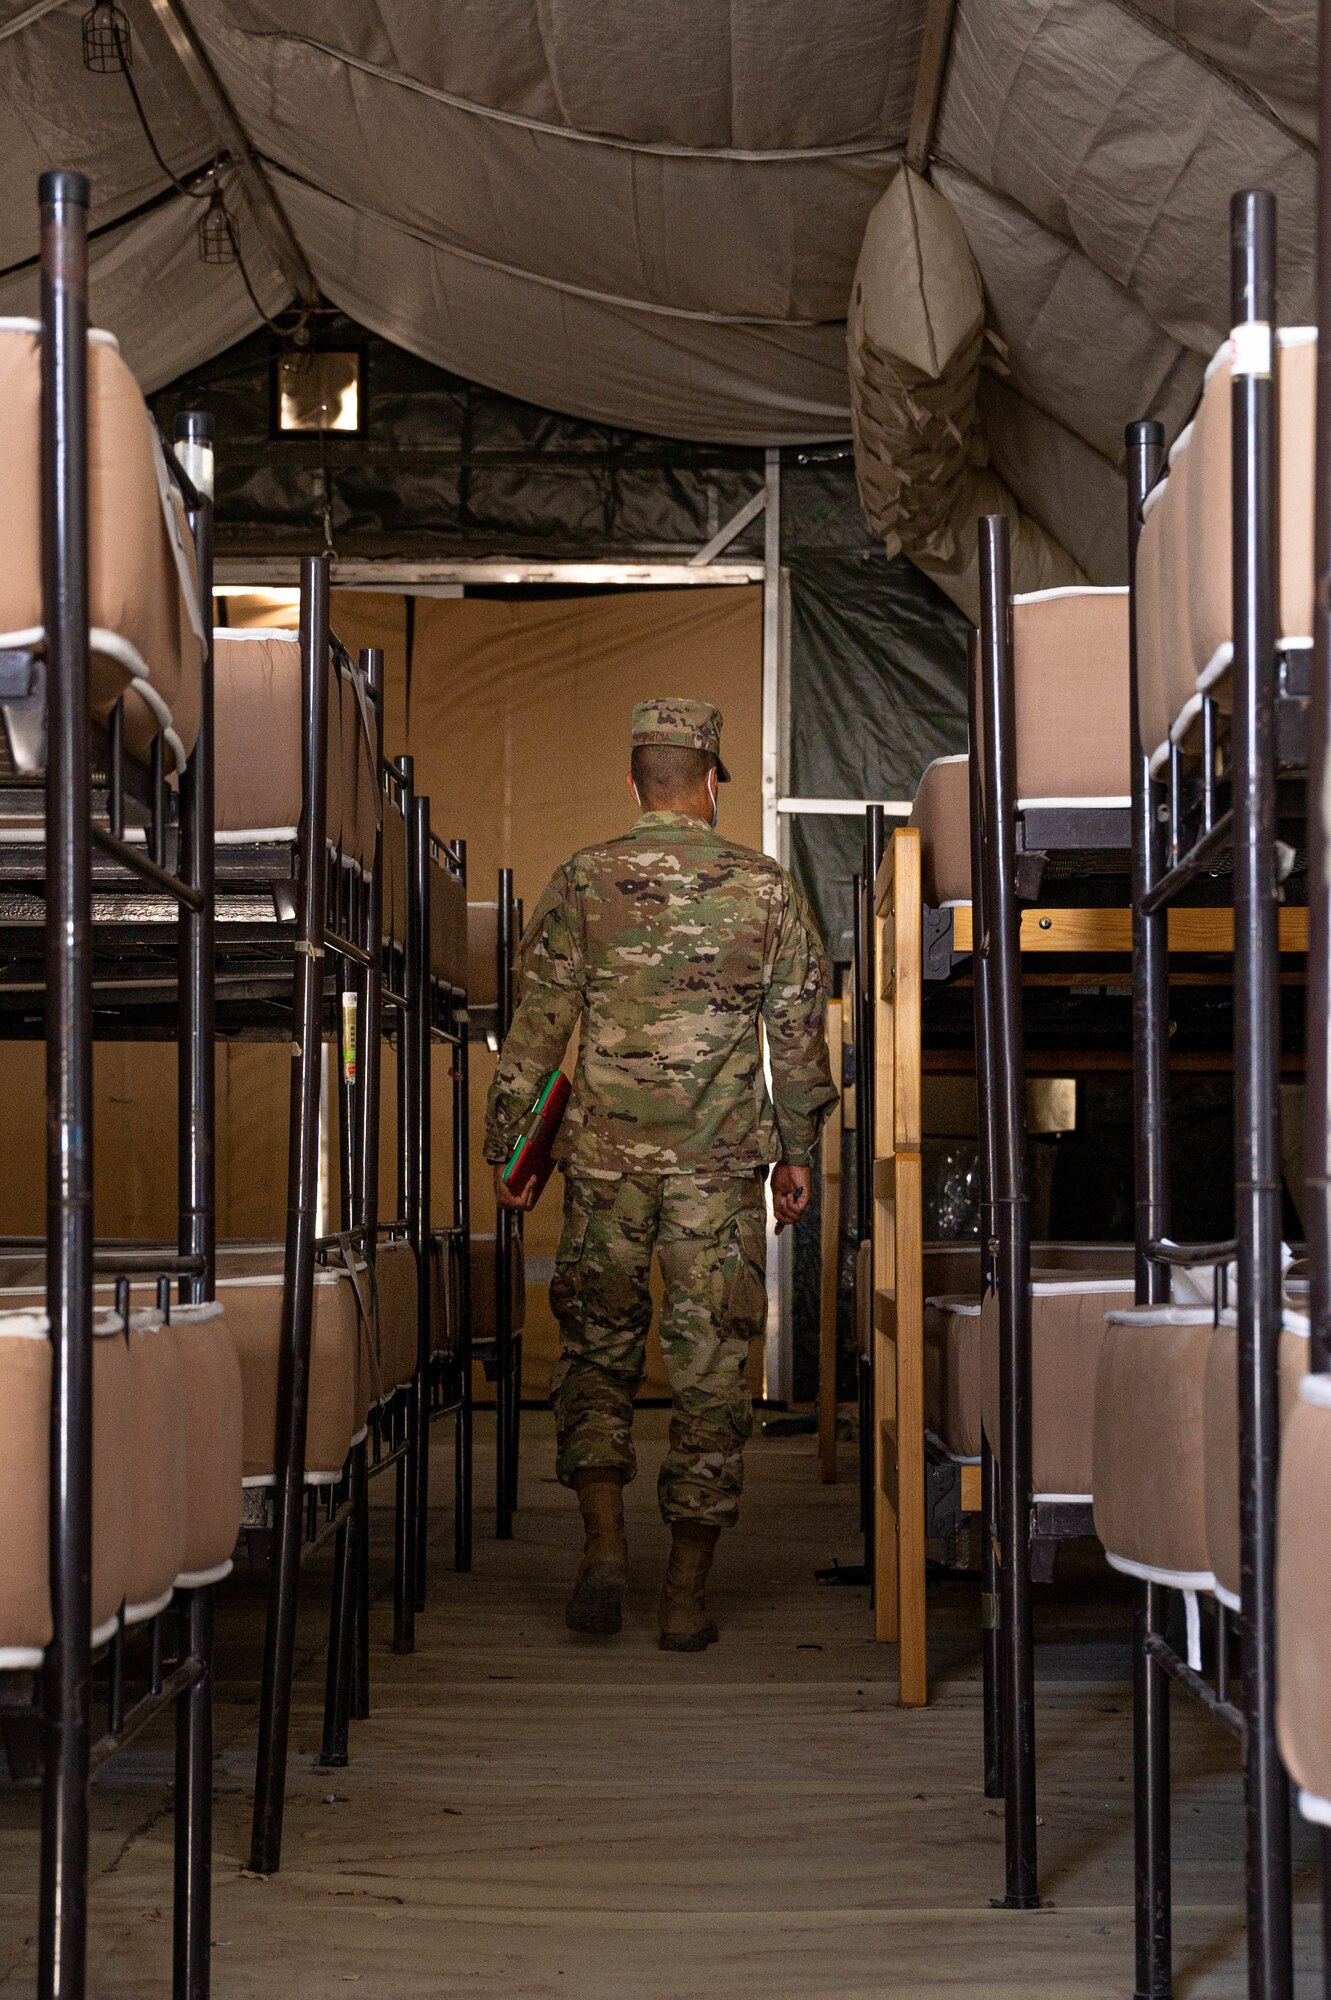 Besides ensuring everyone on base has sheets, pillows and other toiletries, the 386 EFSS lodging office also assists with work orders when something within their facilities goes wrong. Their facilities, including latrines and laundry units, total around 200 buildings.